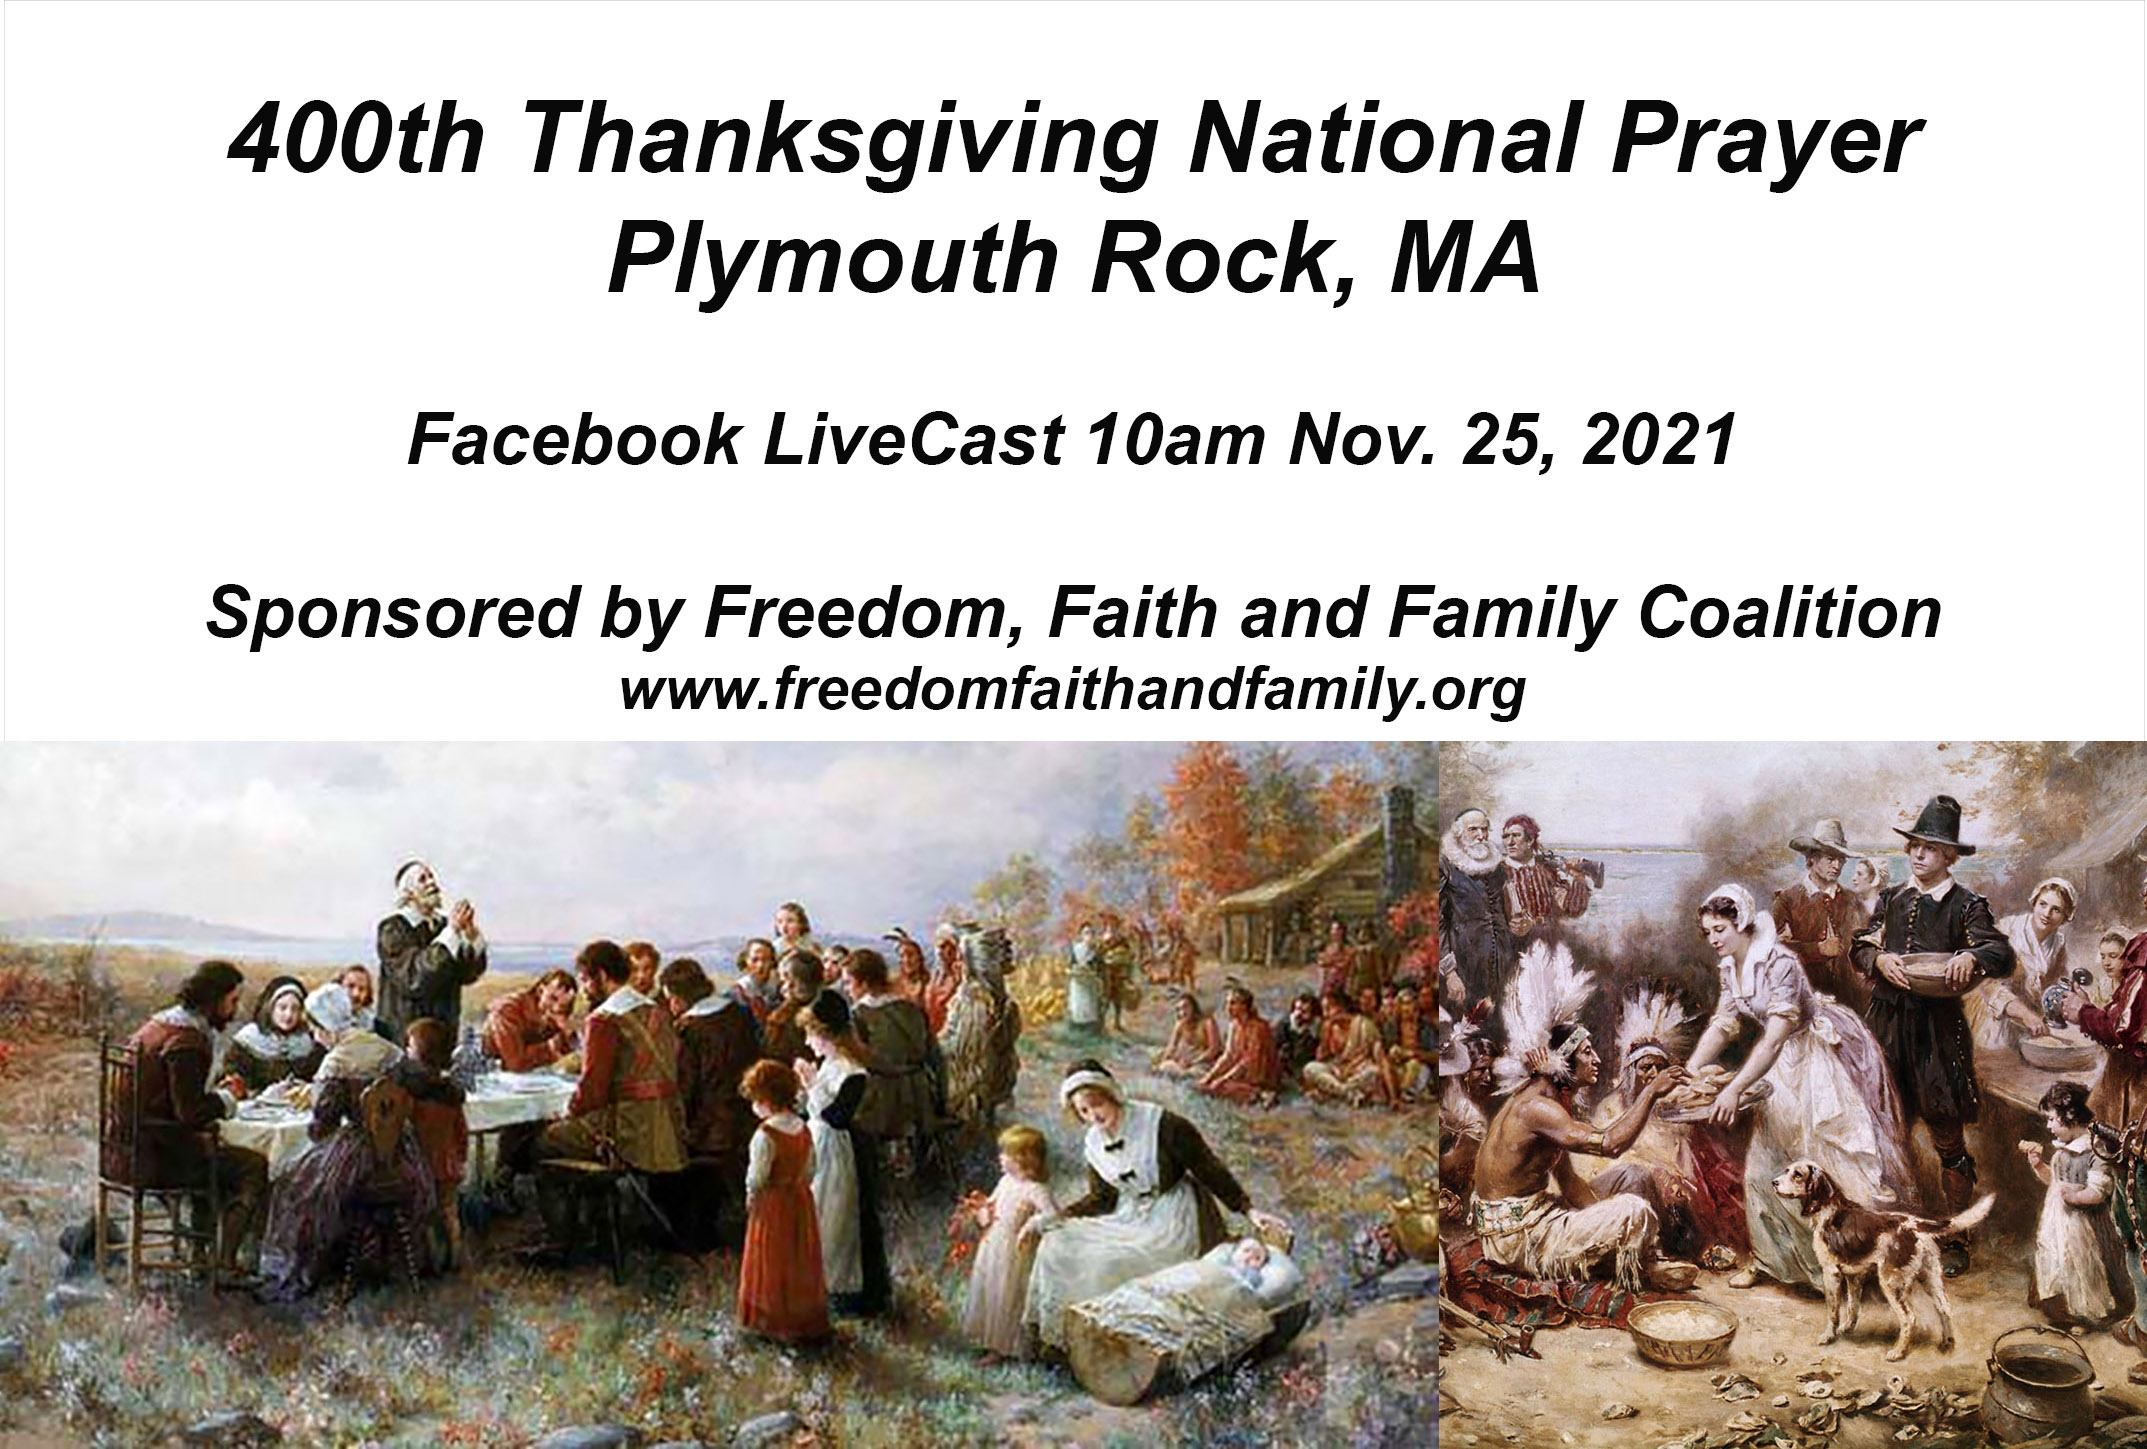 400th Thanksgiving National Prayer - Freedom, Faith and Family Coalition - We hold these truths to be self-evident